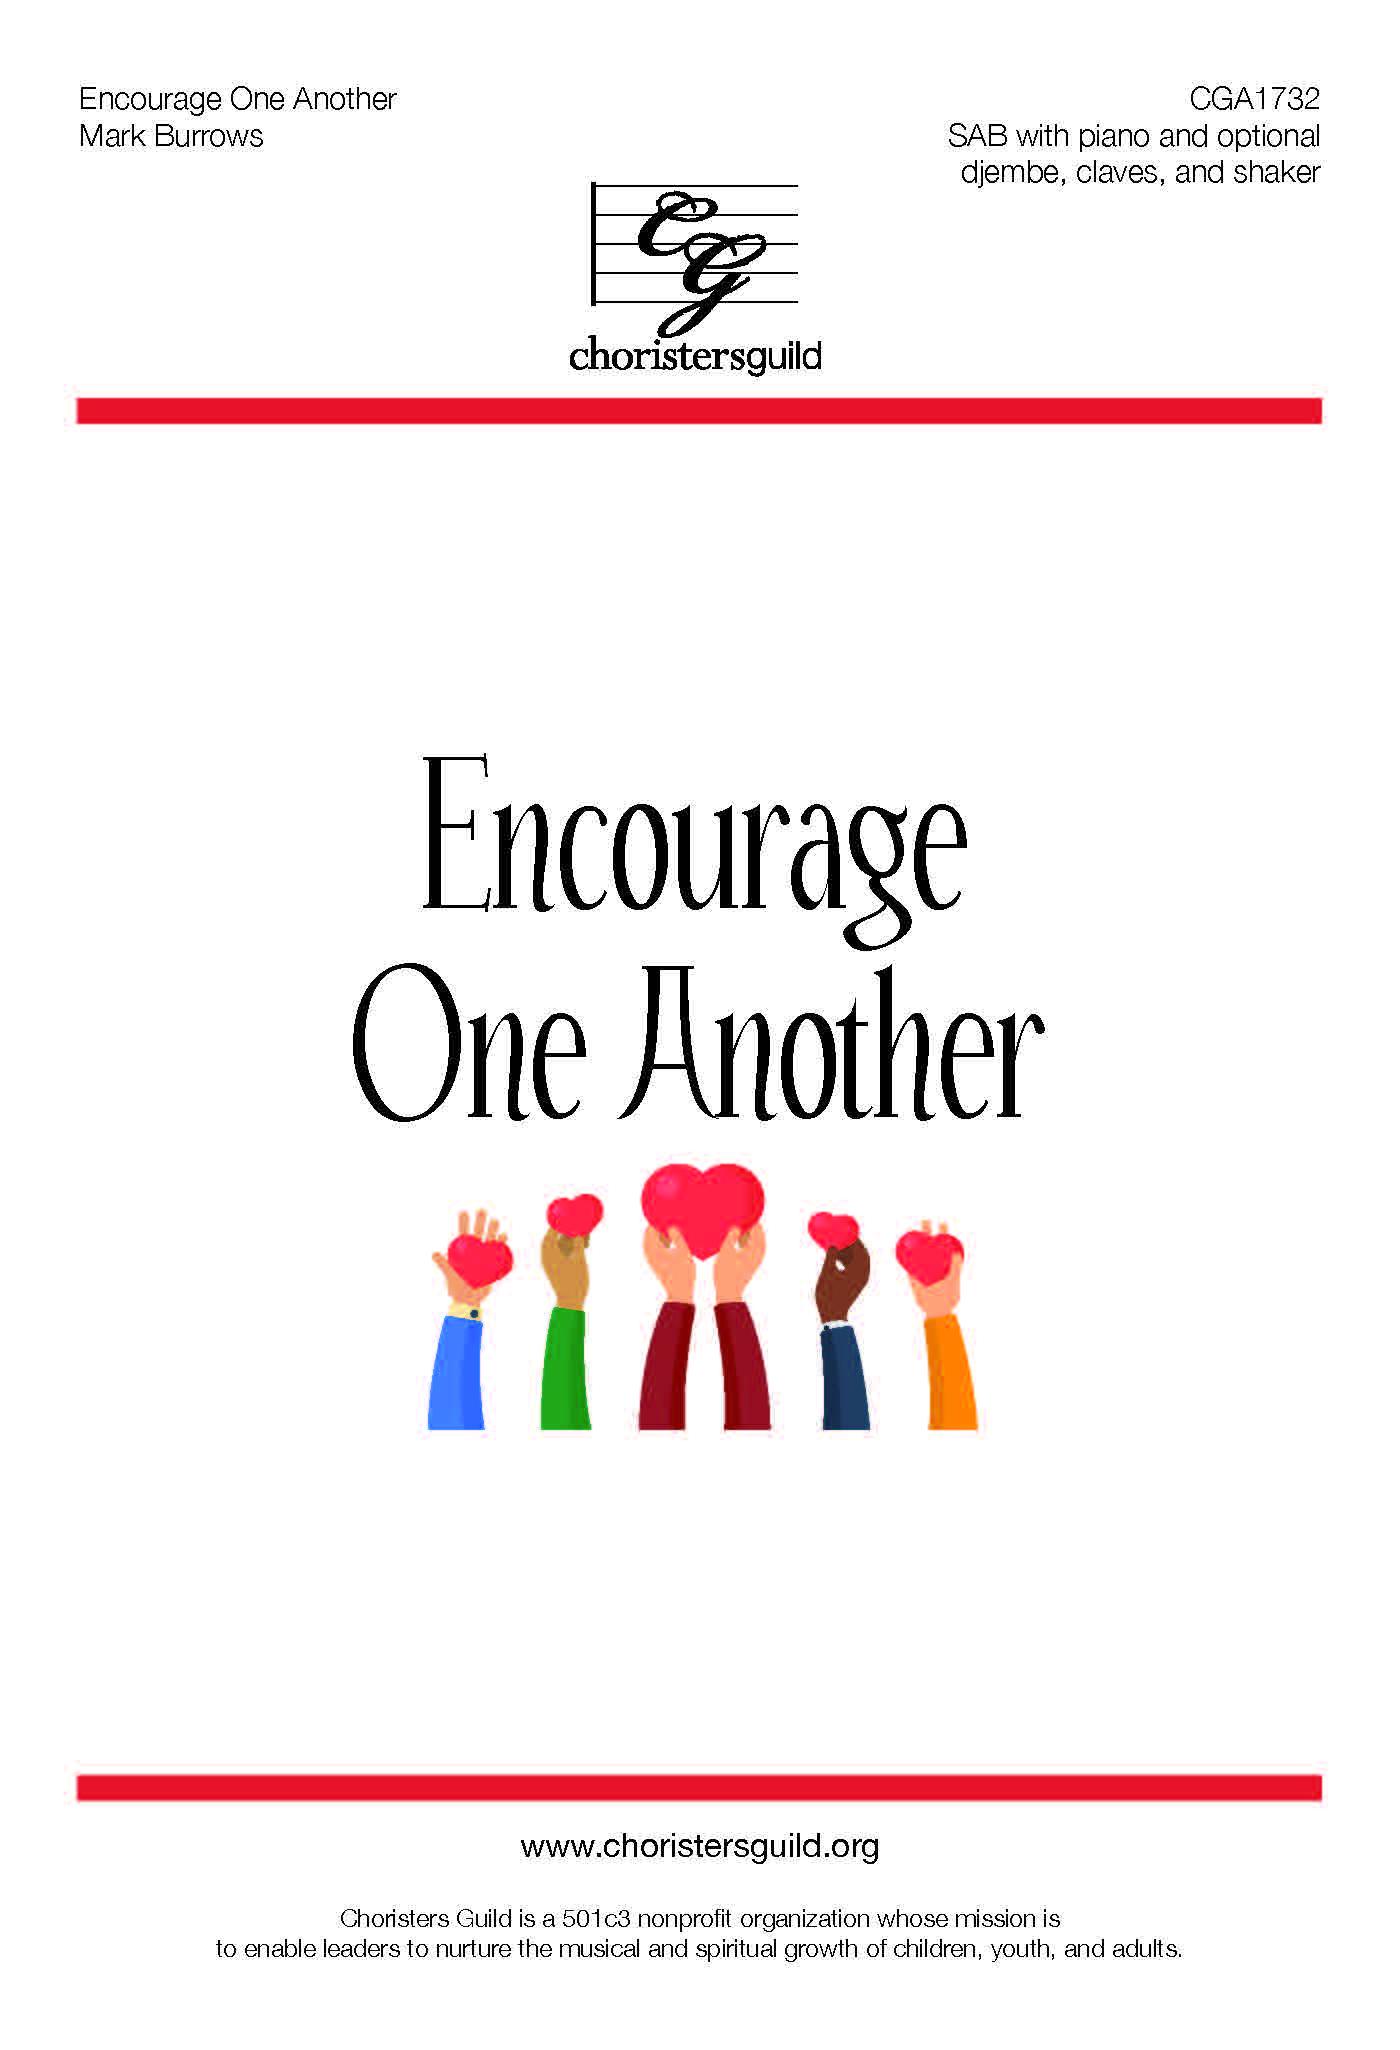 Encourage One Another - SAB